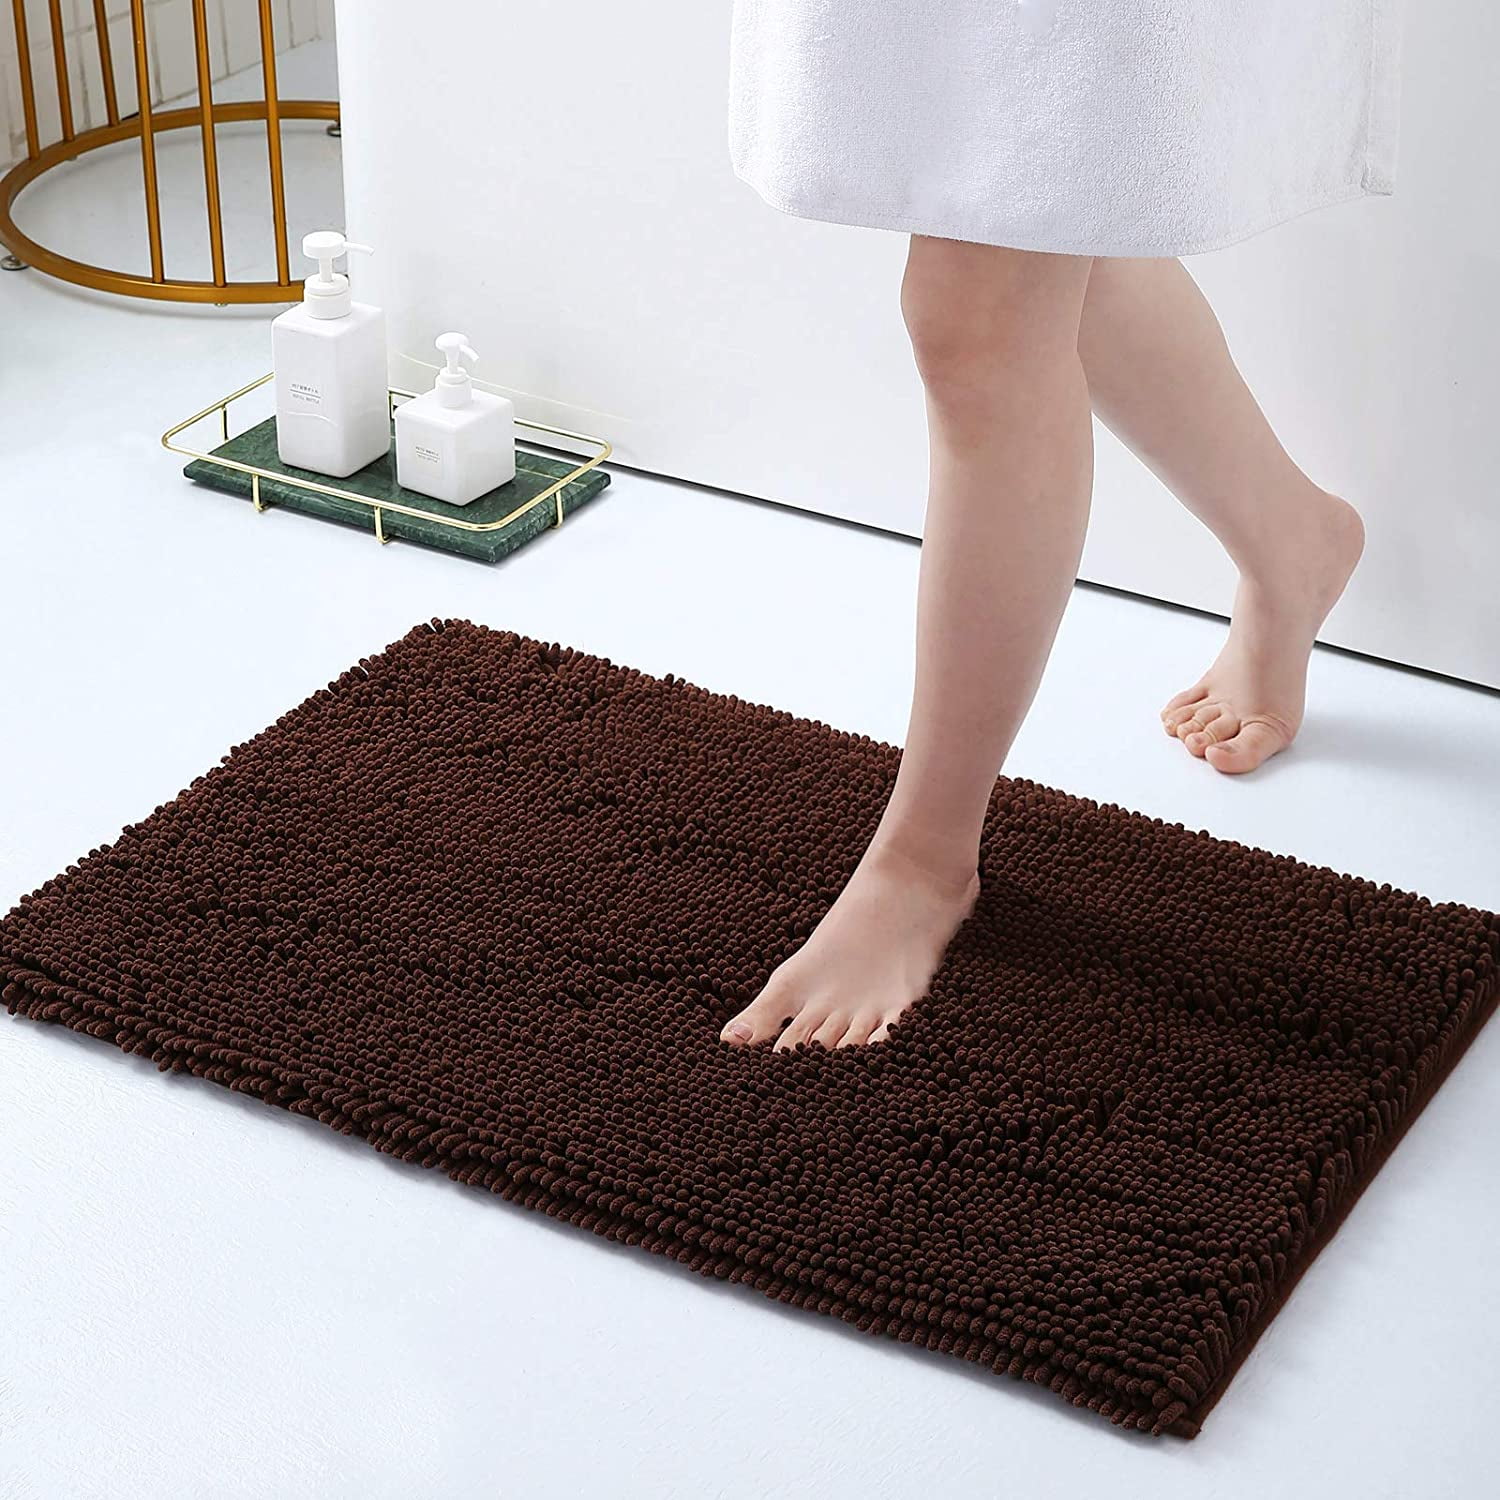 Anti-Slip Bath Mats Extra Soft and Thick Bath Rugs for Bathroom Absorbent Shaggy Chenille Floor Mats 20 x 32 Plus 17 x 24 Inches Dry Fast Area Rugs Set of 2 Aqua Green 